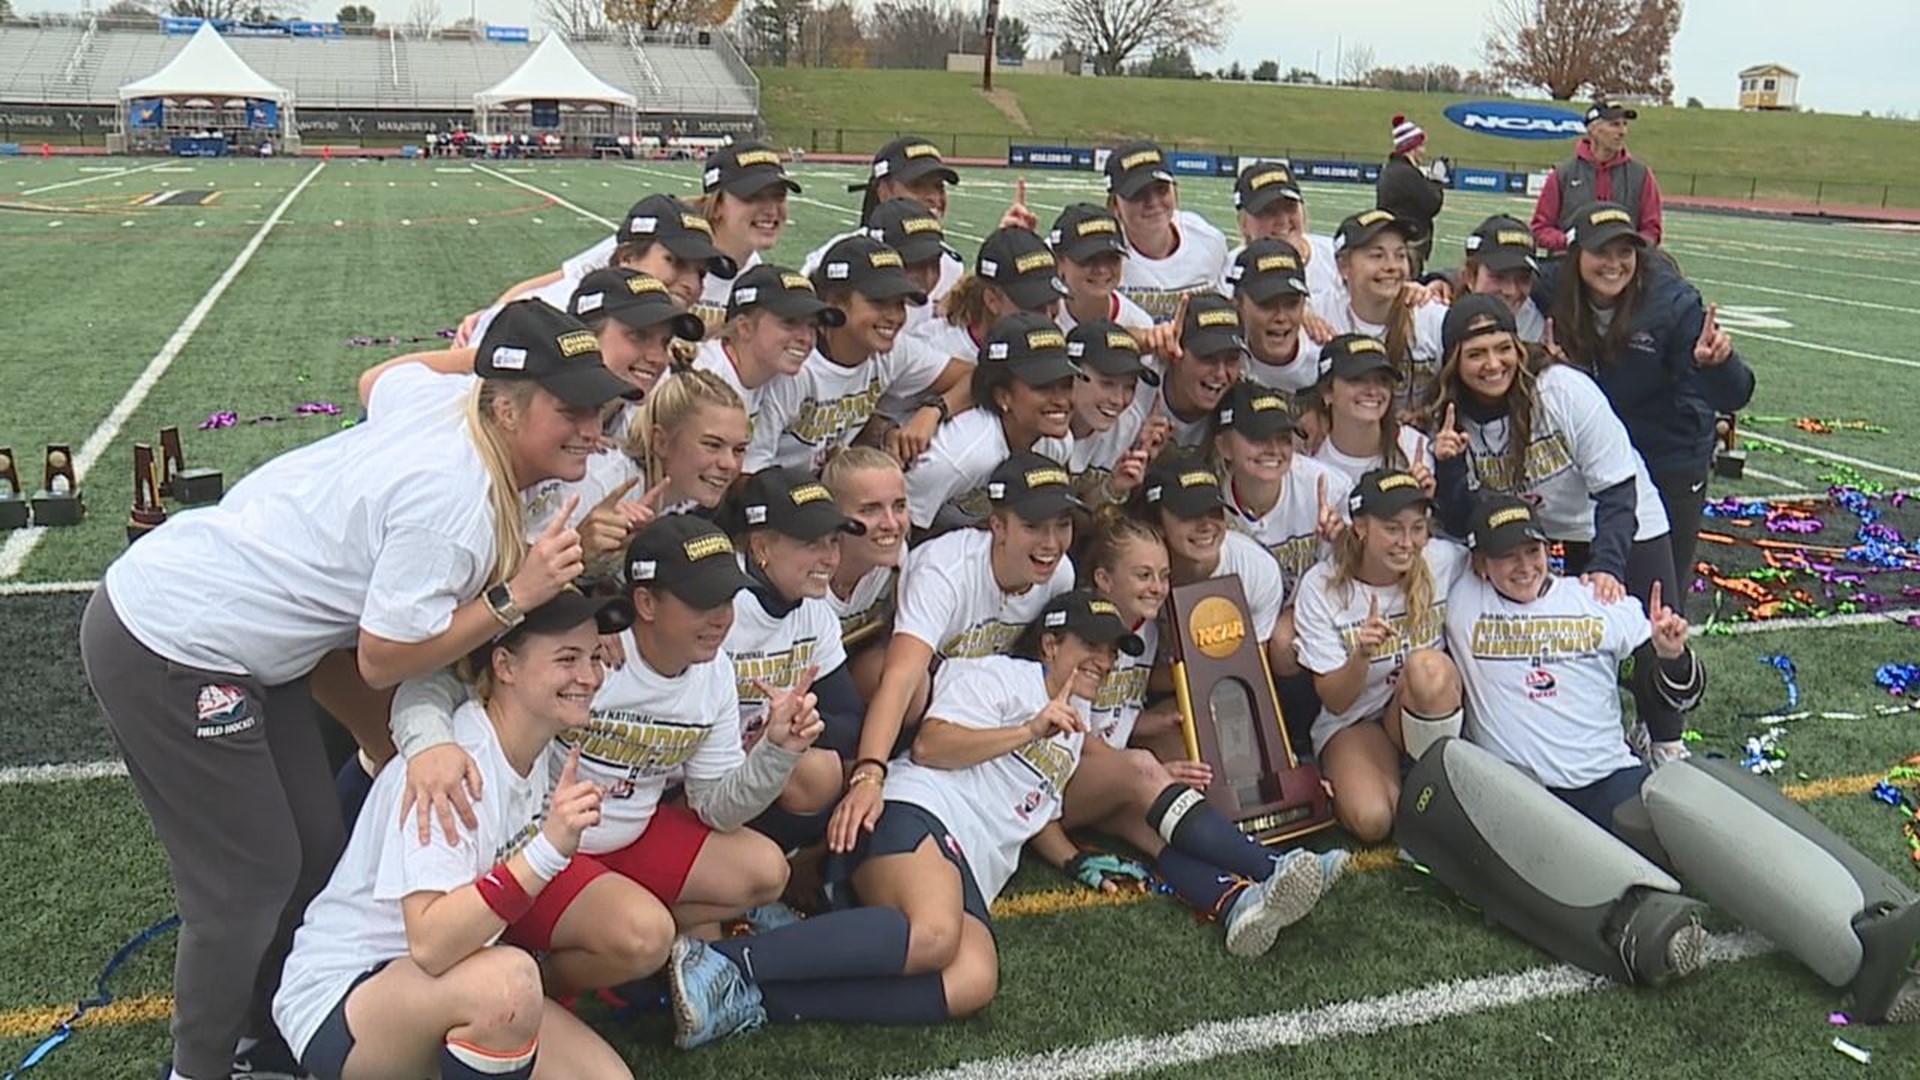 The Raiders beat West Chester for the fourth time this season, improving to 20-0, and taking home the Division II National Championship with a 3-0 win.